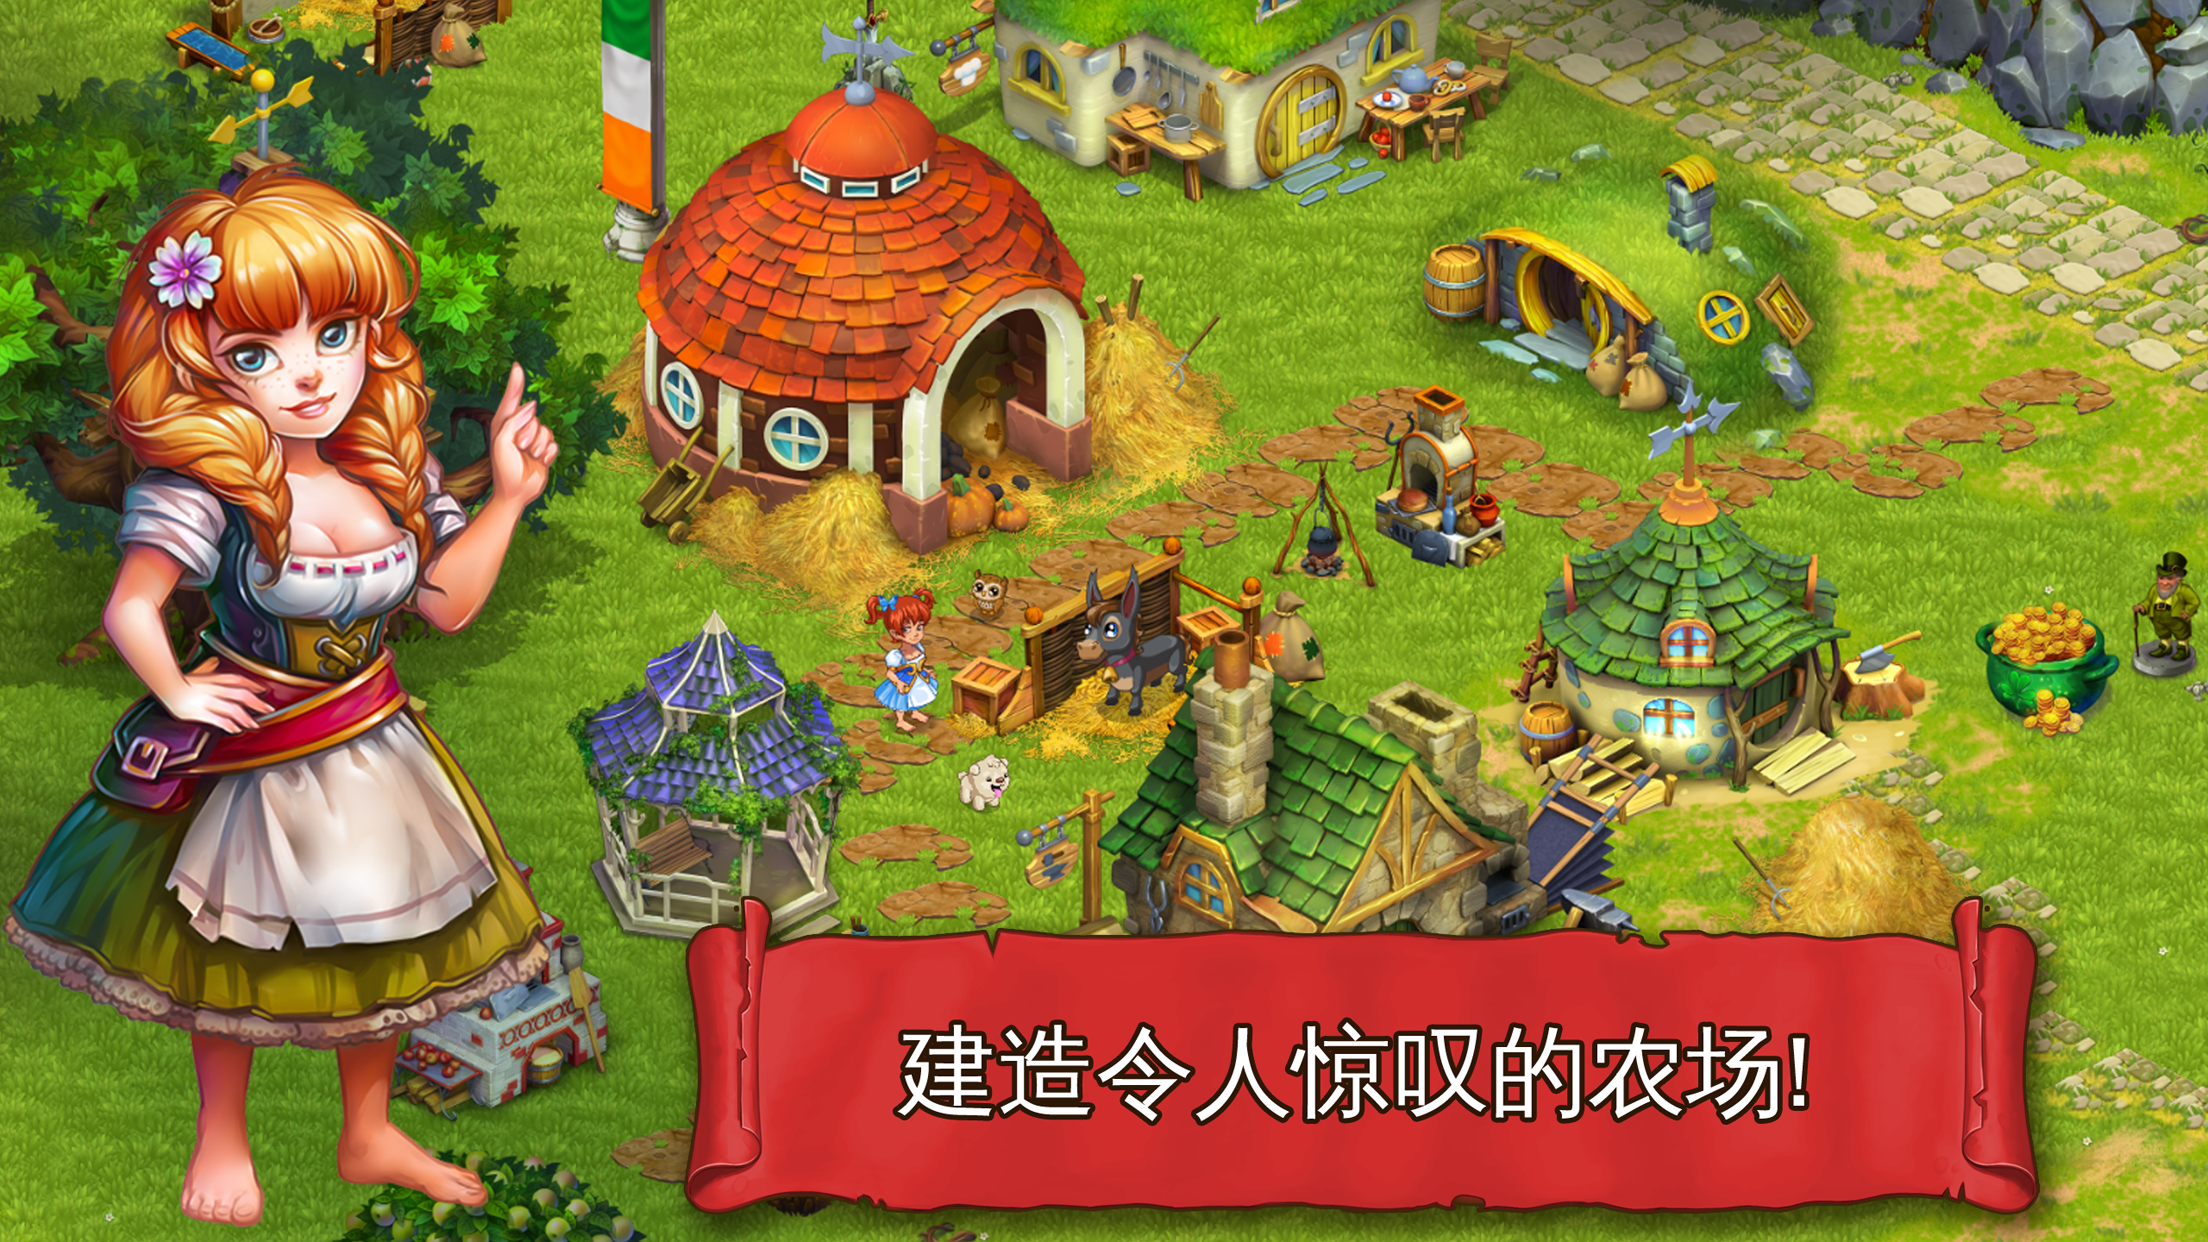 Android application Farmdale: farming games & town with villagers screenshort